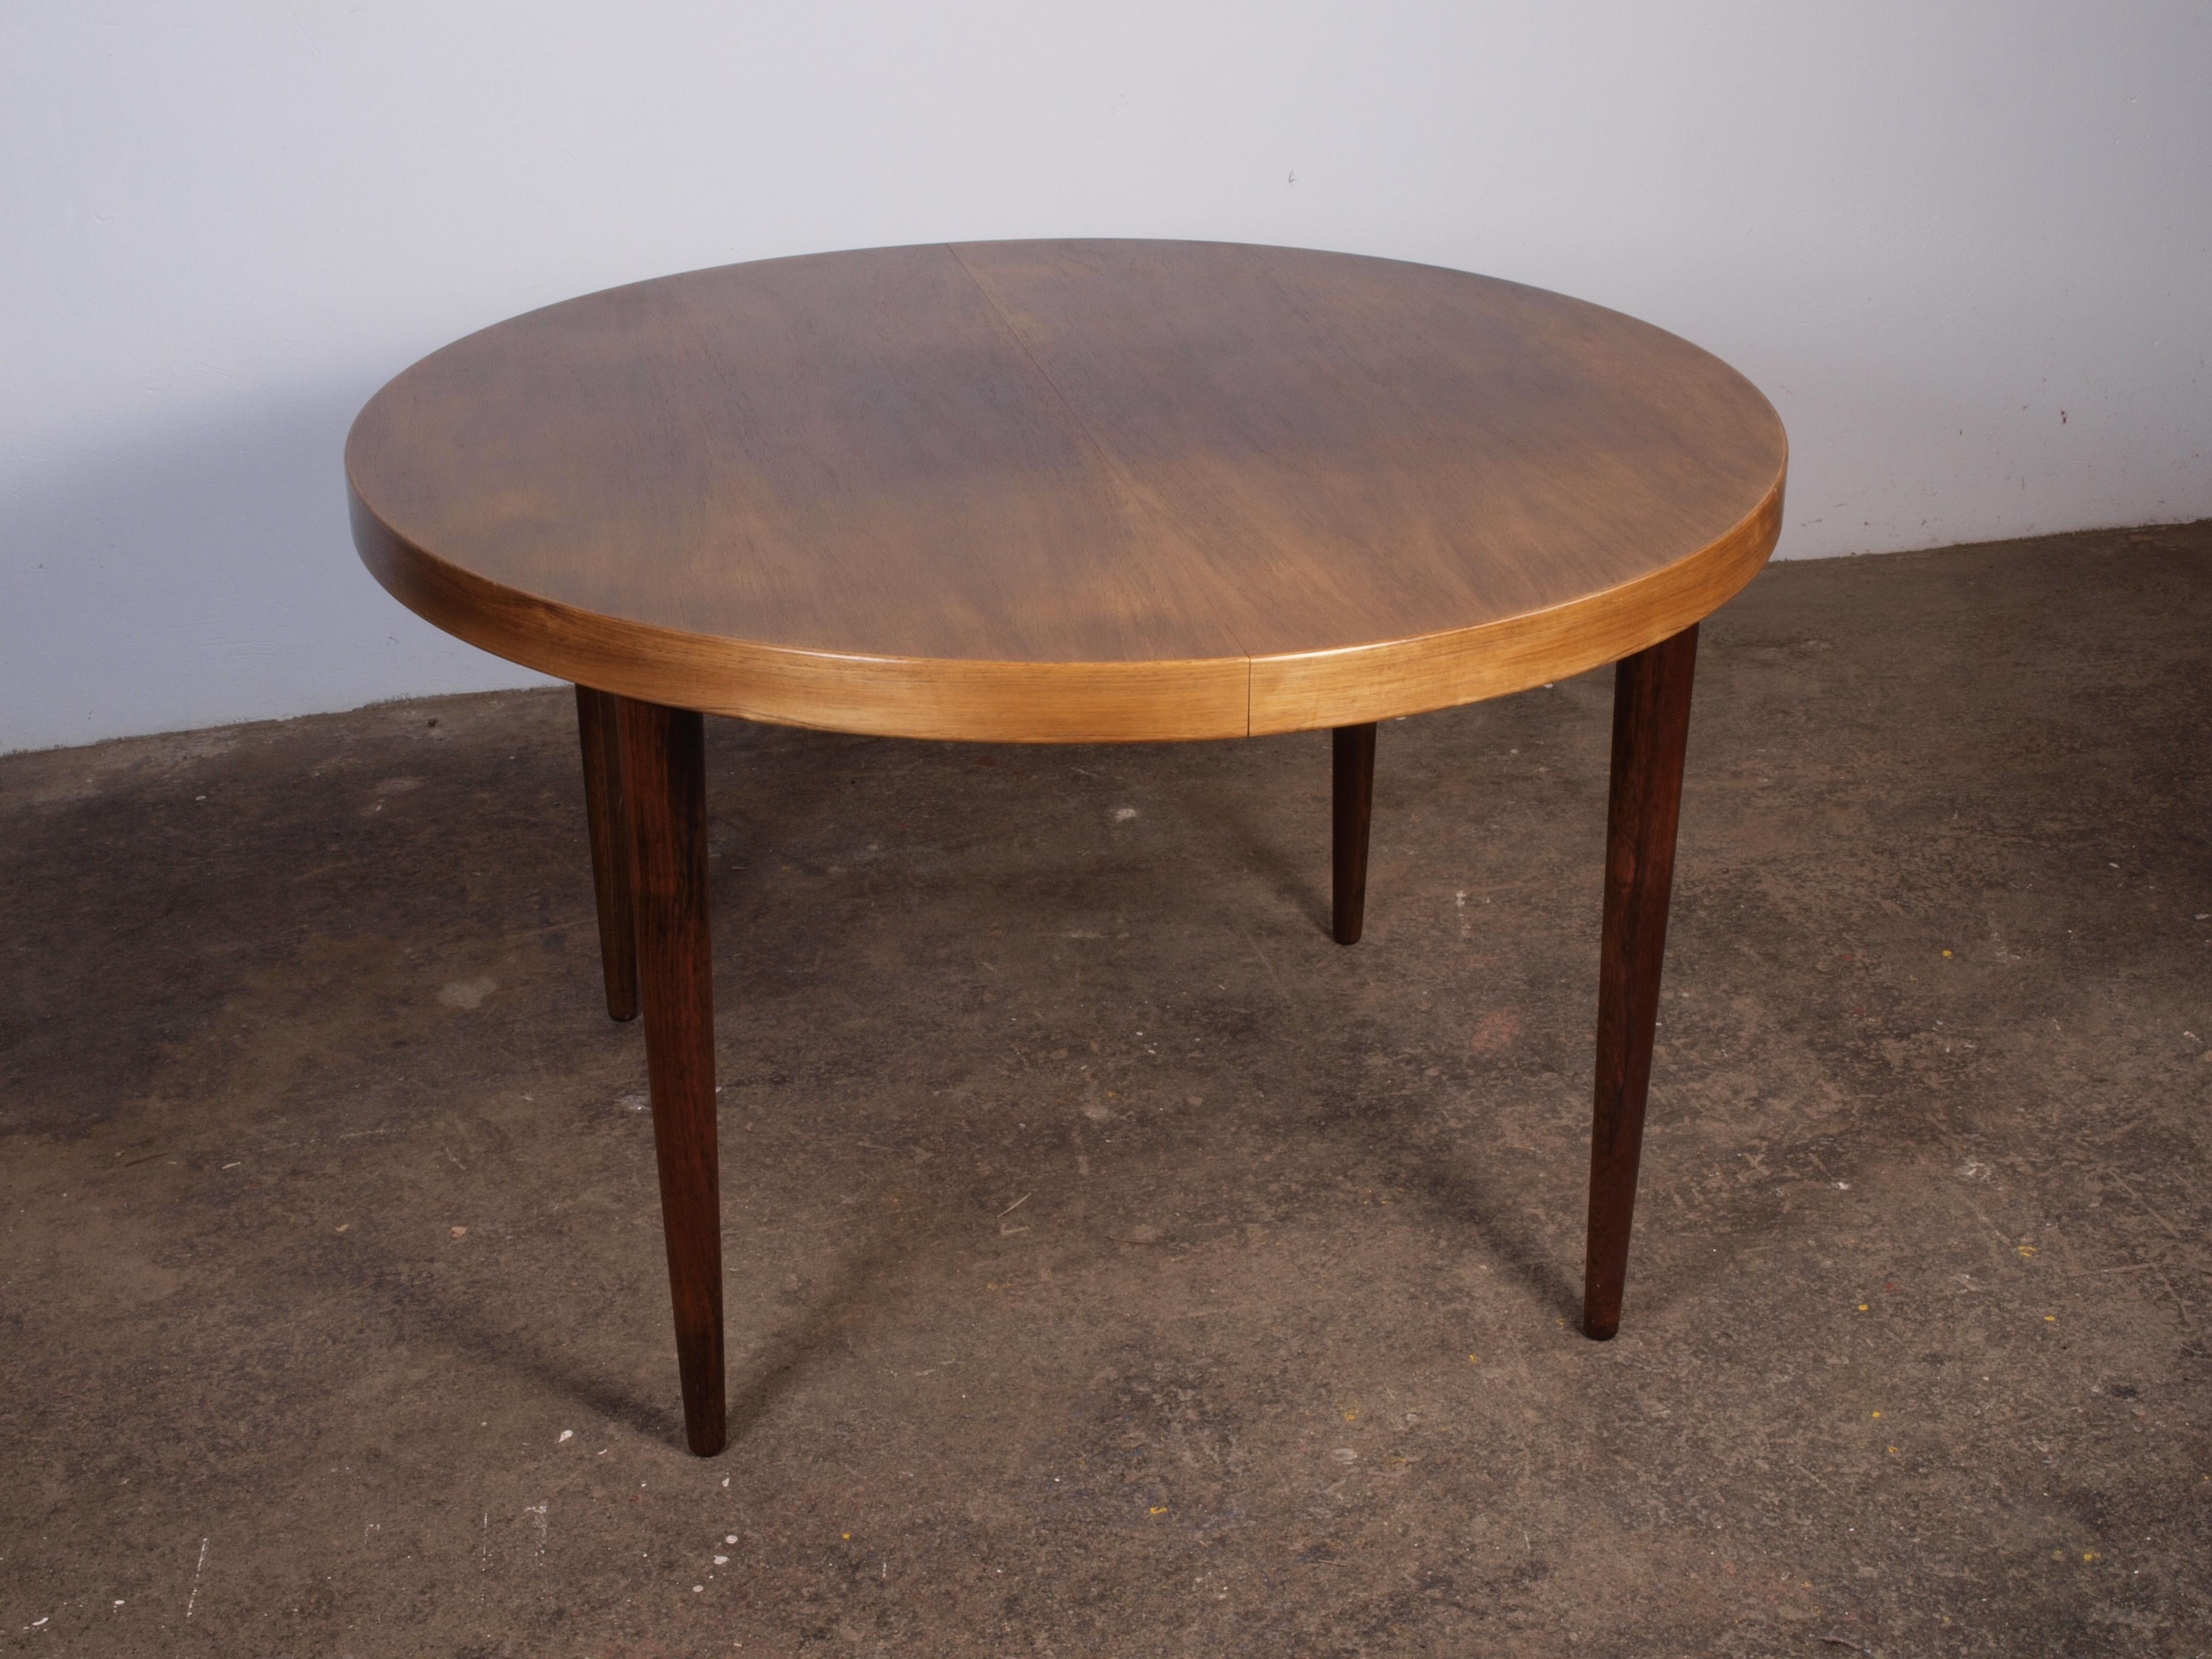 Well-maintained round rosewood dining table with extension leaves, attributed to architect Kai Kristiansen. Produced in the 1960s, this rare wood table is in excellent condition with no noticeable flaws. Cleaned and treated for preservation.